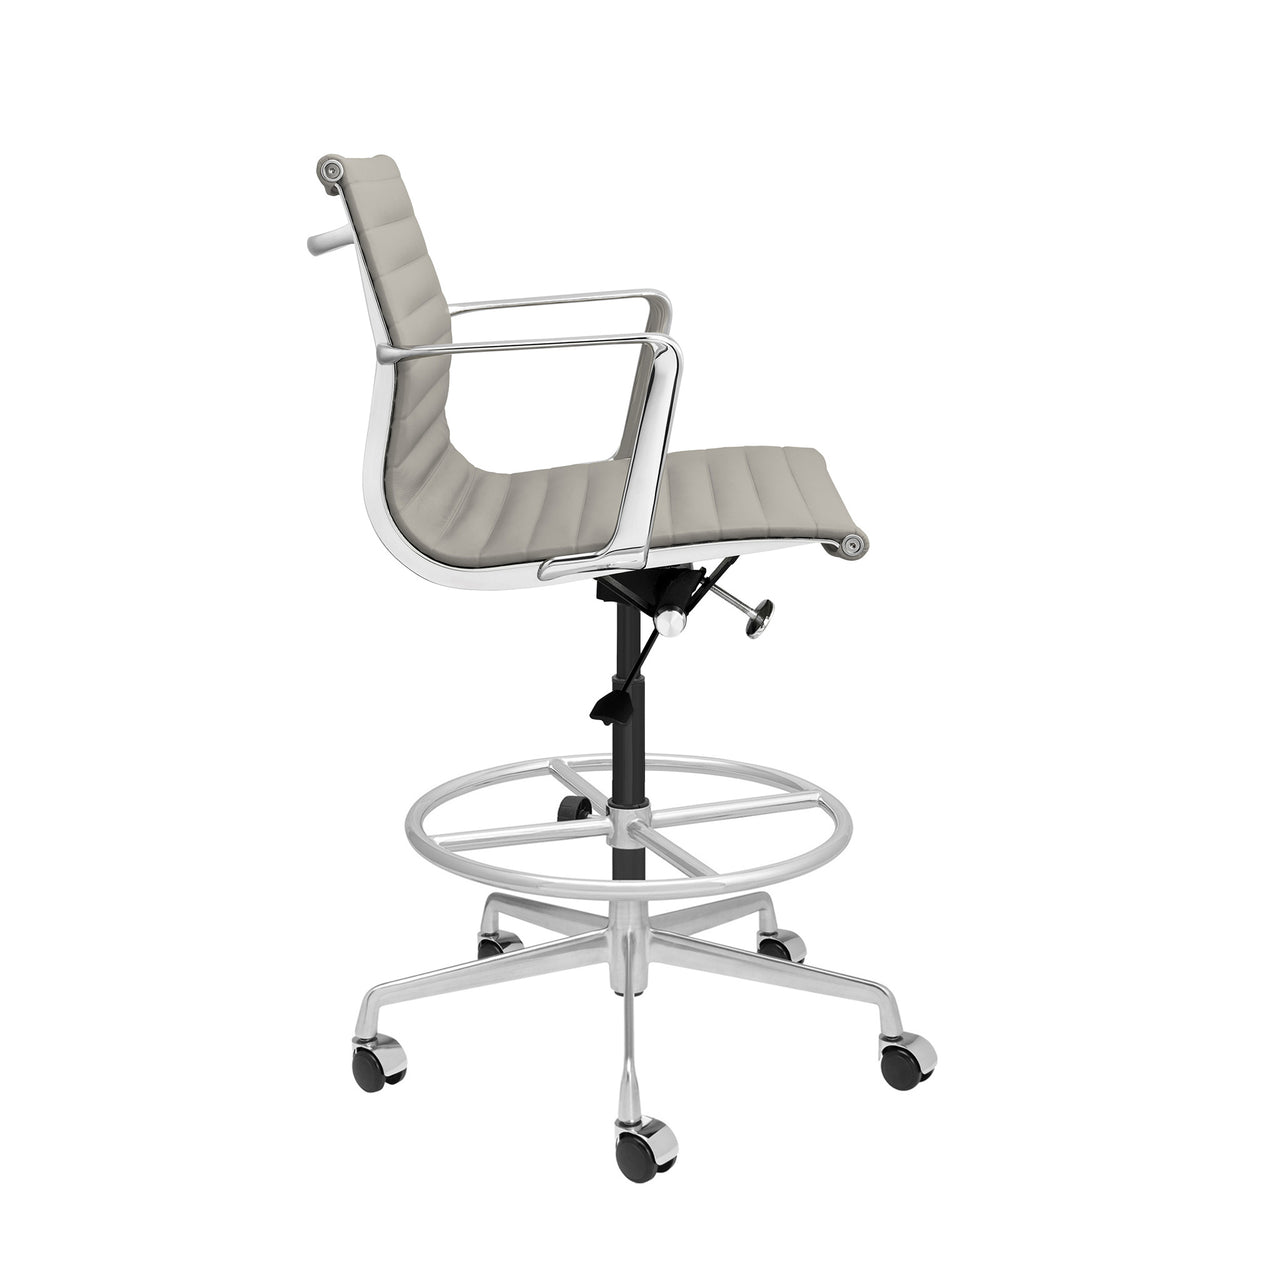 SHIPS JAN 30TH - Pro Ribbed Drafting Chair (Grey Italian Leather)